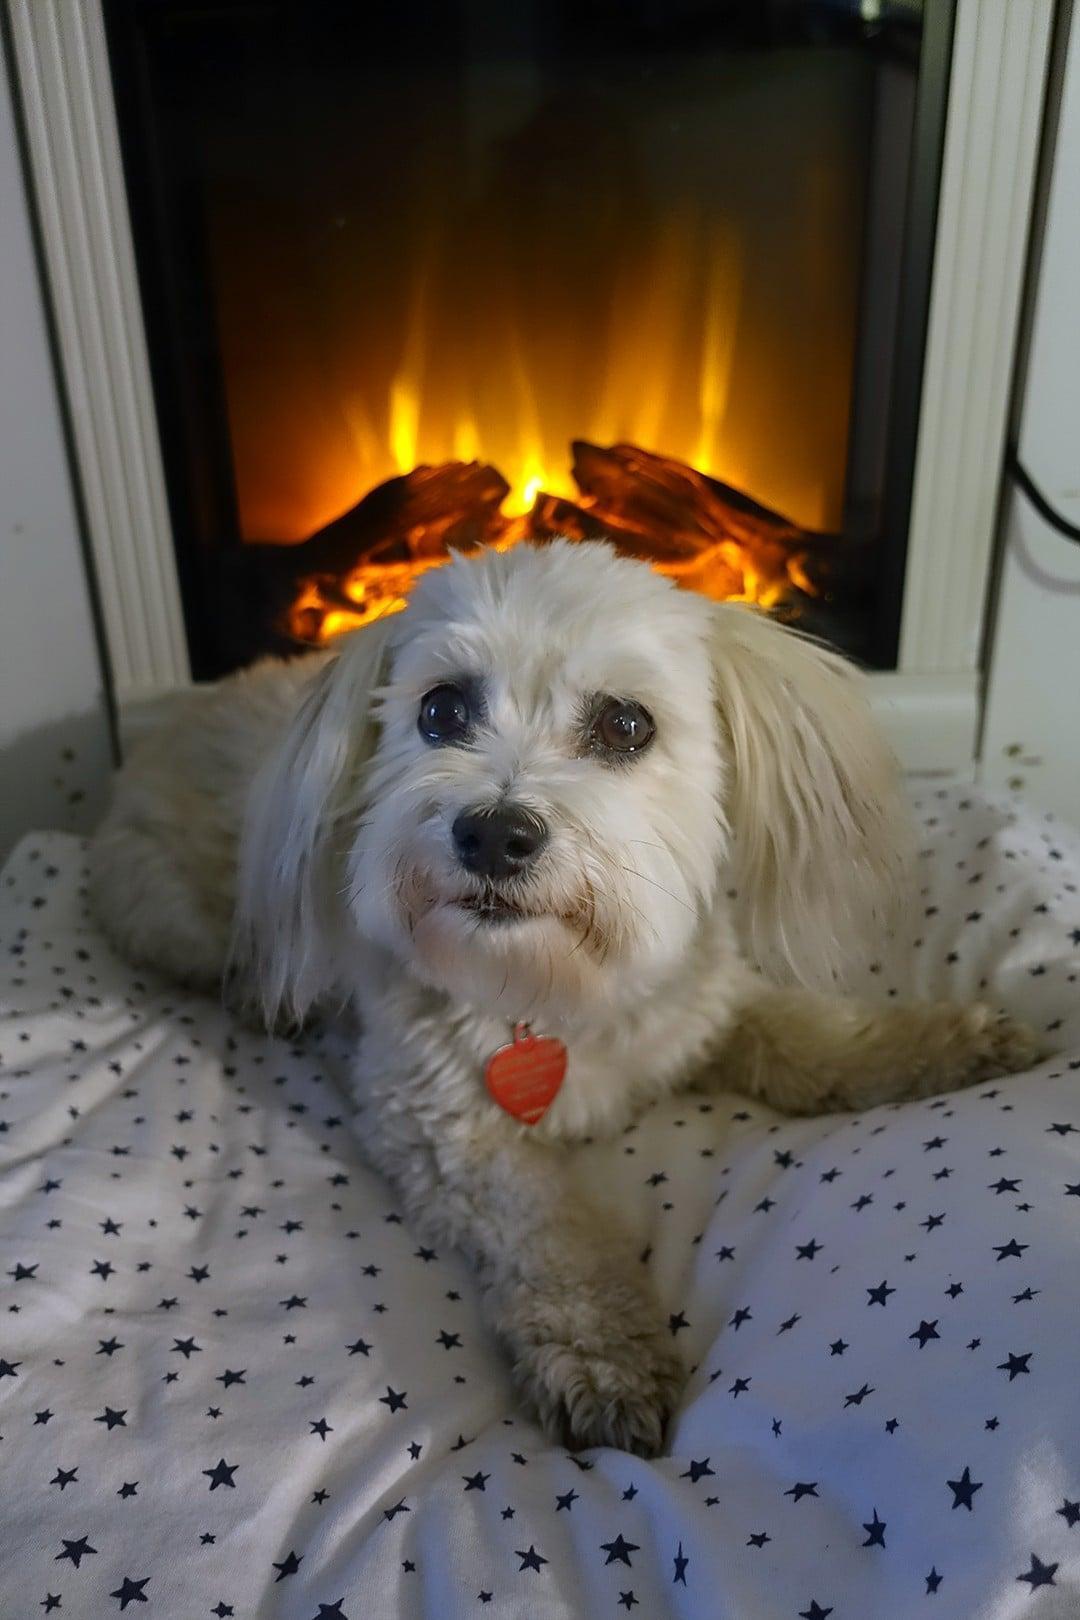 Robin Botie of Ithaca, New York, photographs her dog in front of the new fake fireplace she gifted herself for Thanksgiving.